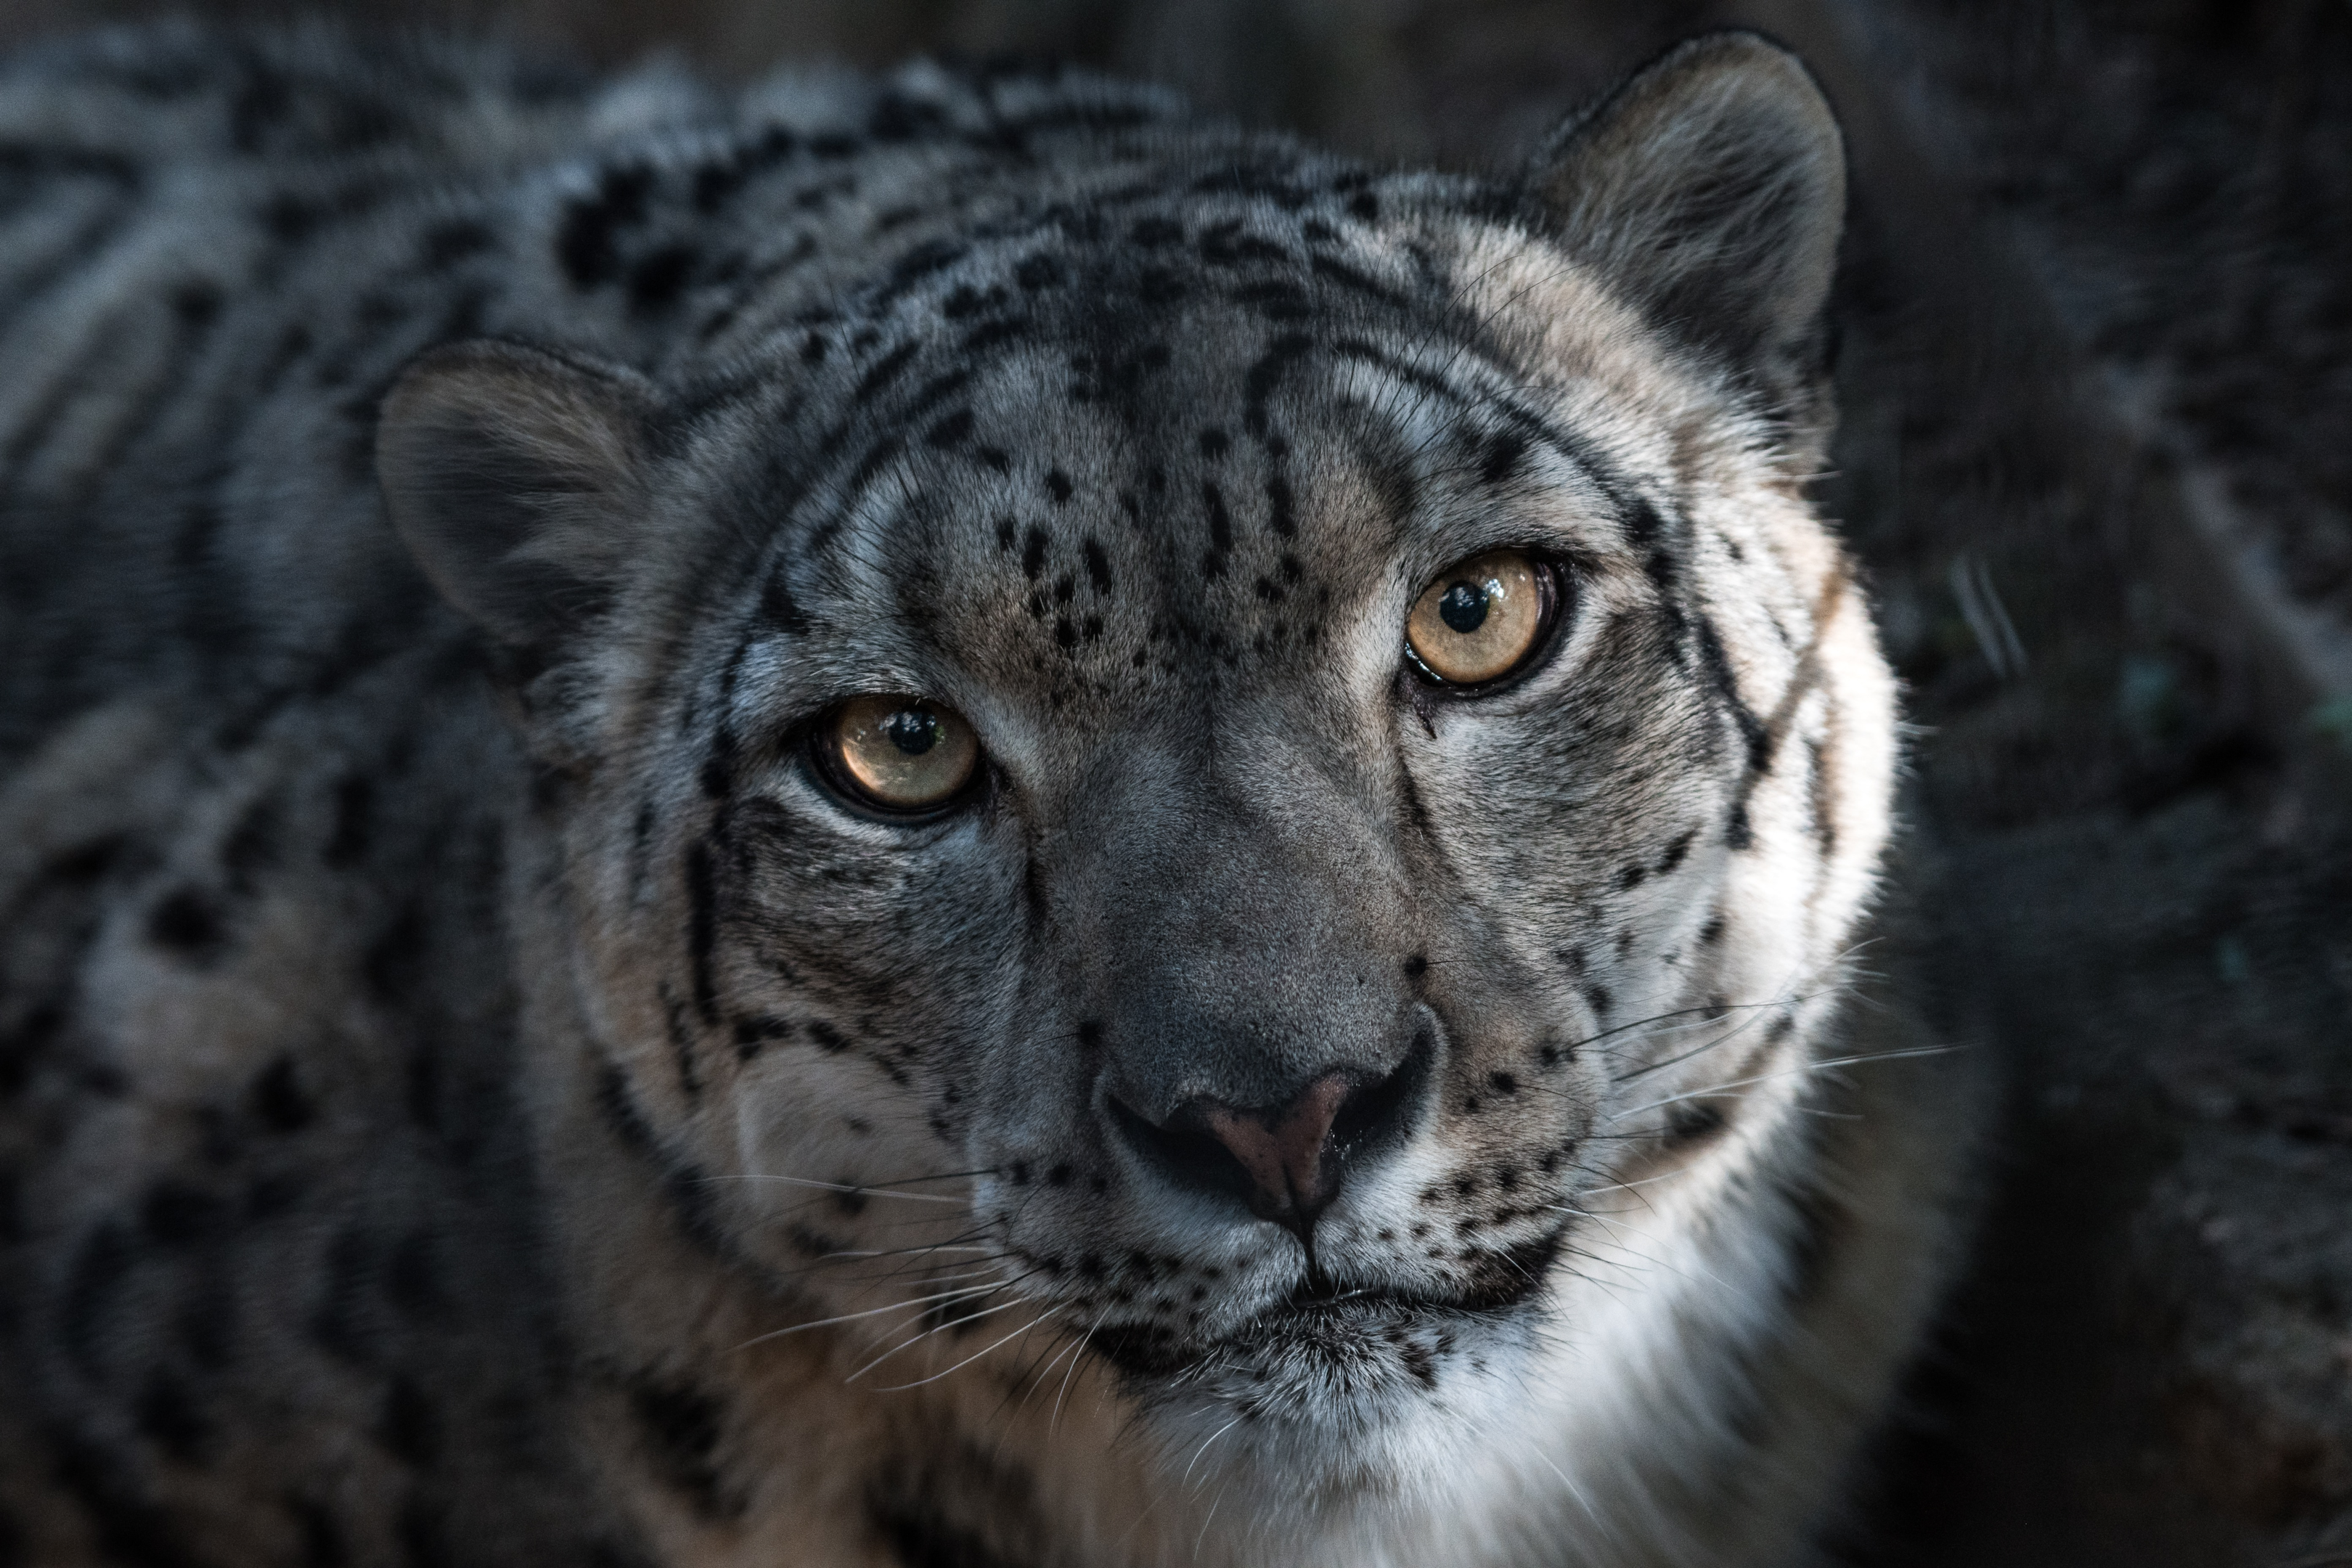 A snow leopard walking in the snow, with its furry paws and long hind legs